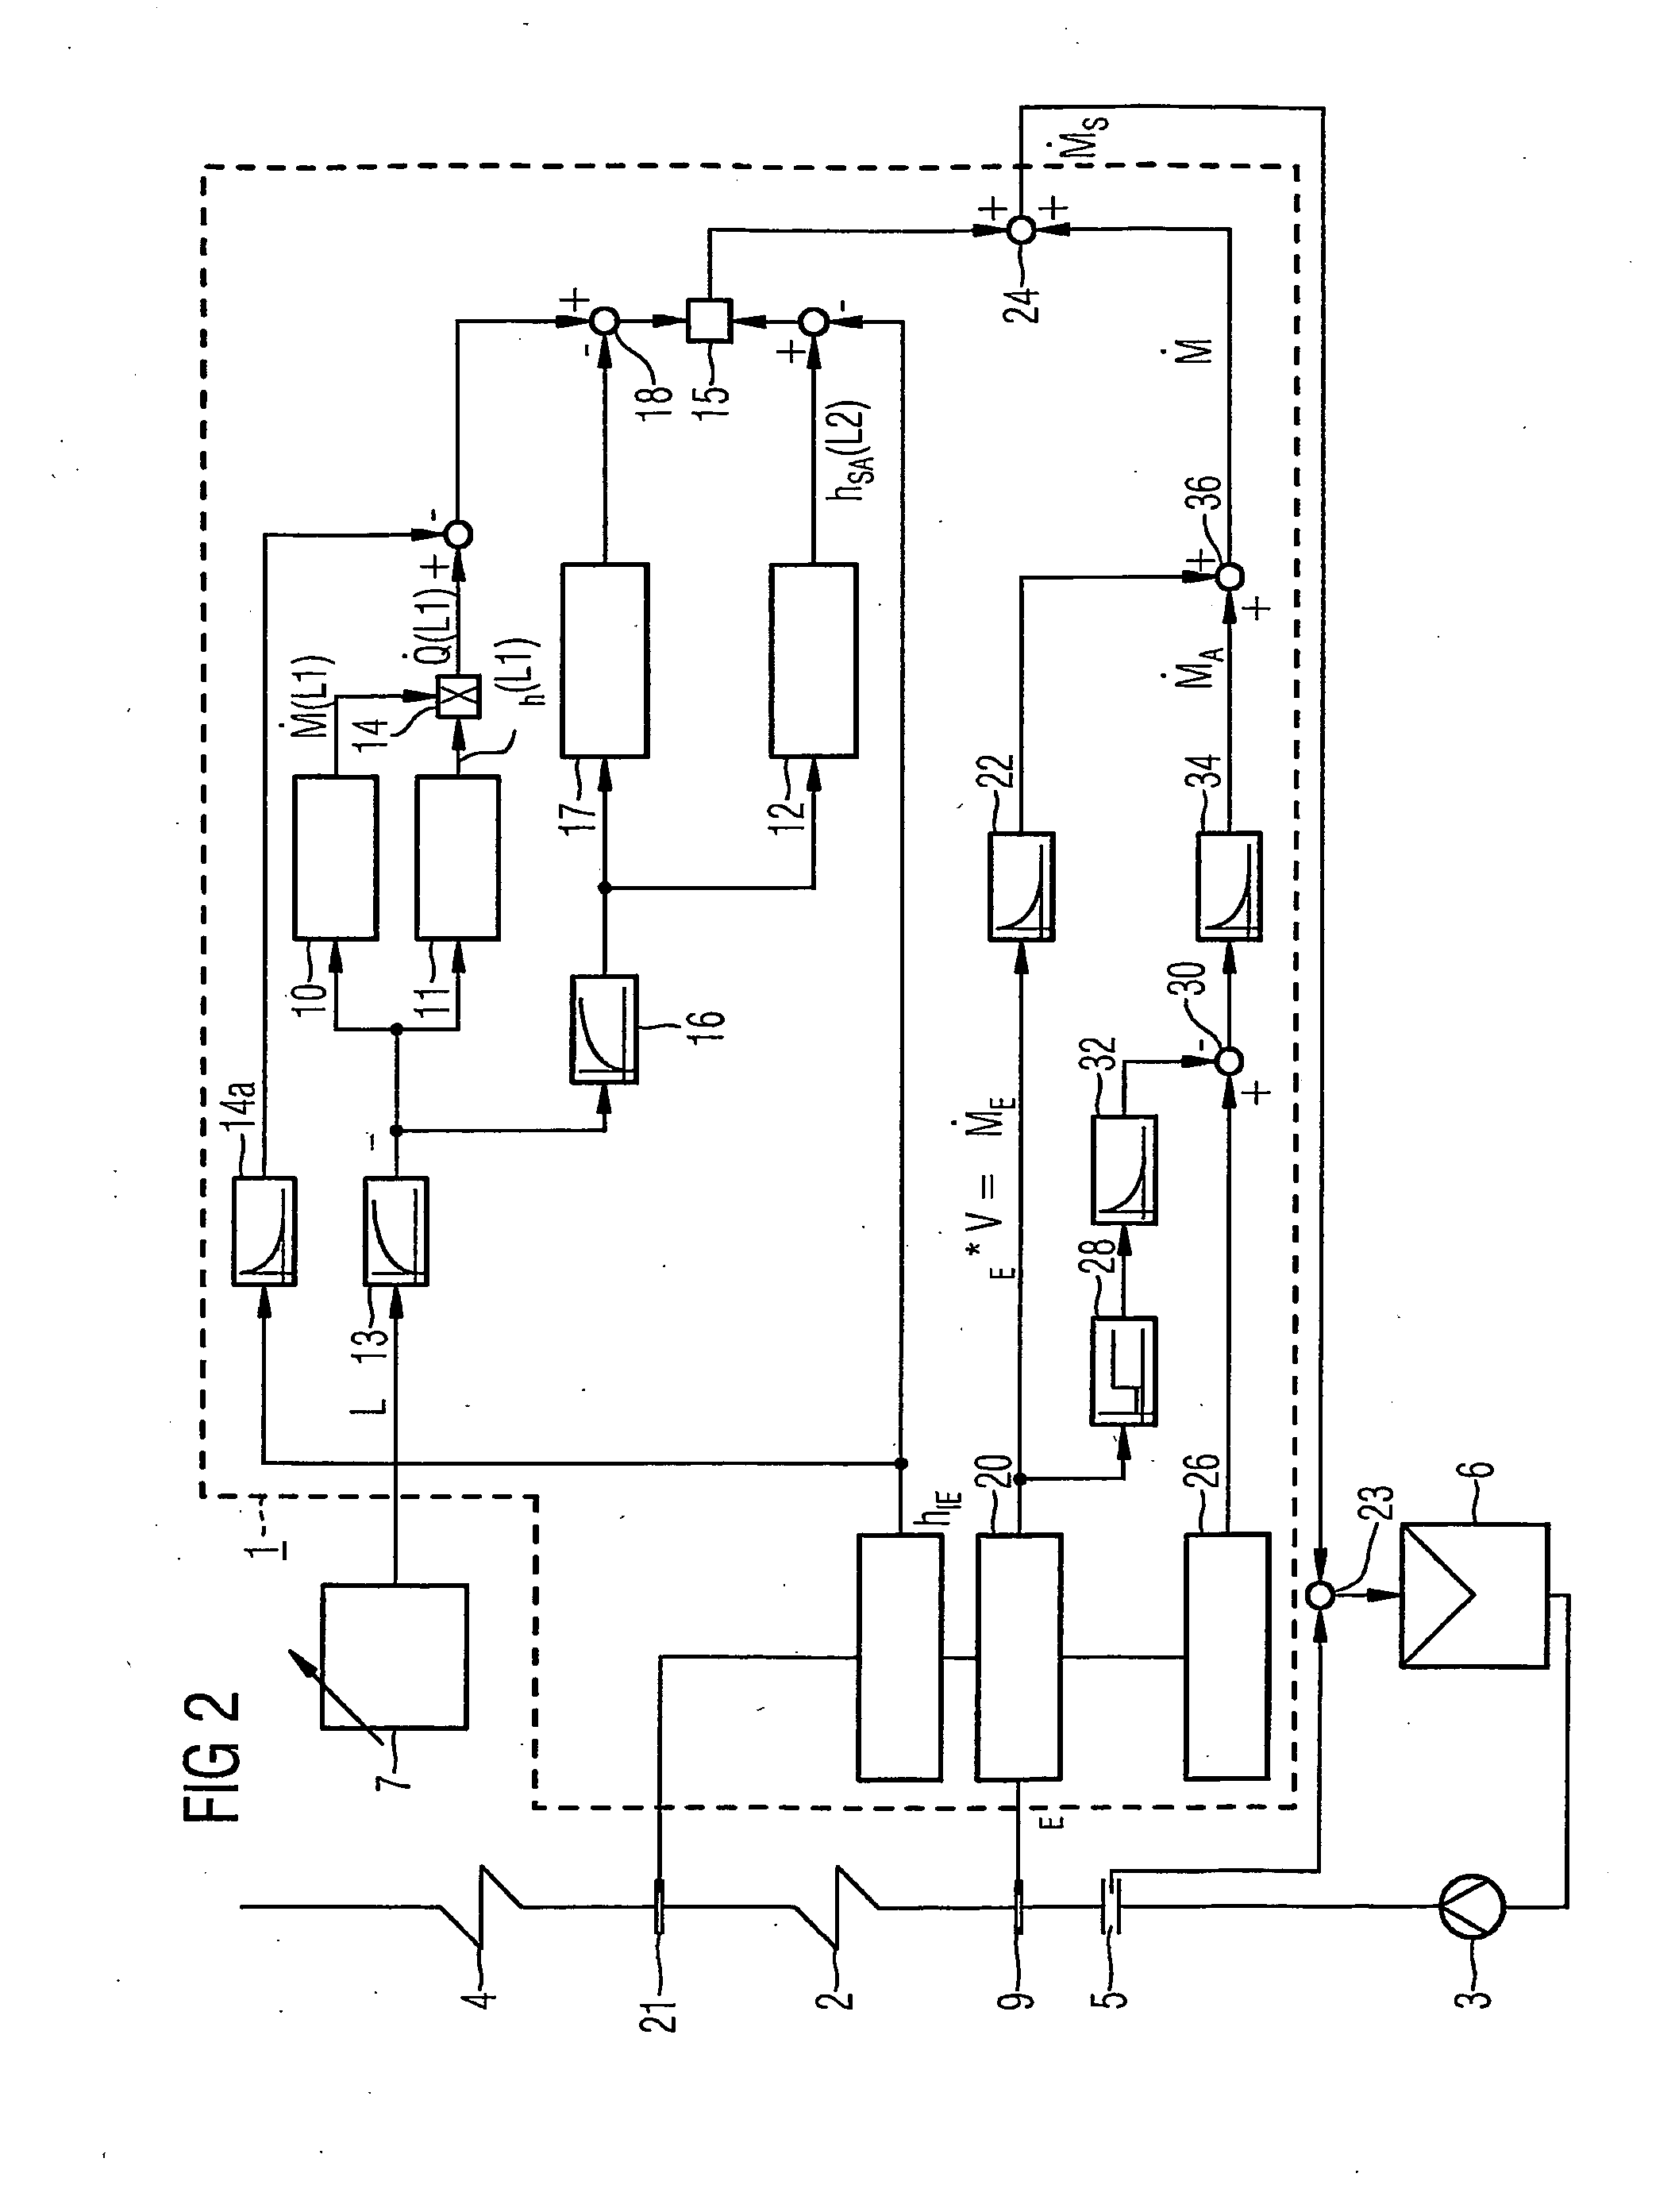 Process for Operating a Continuous Steam Generator